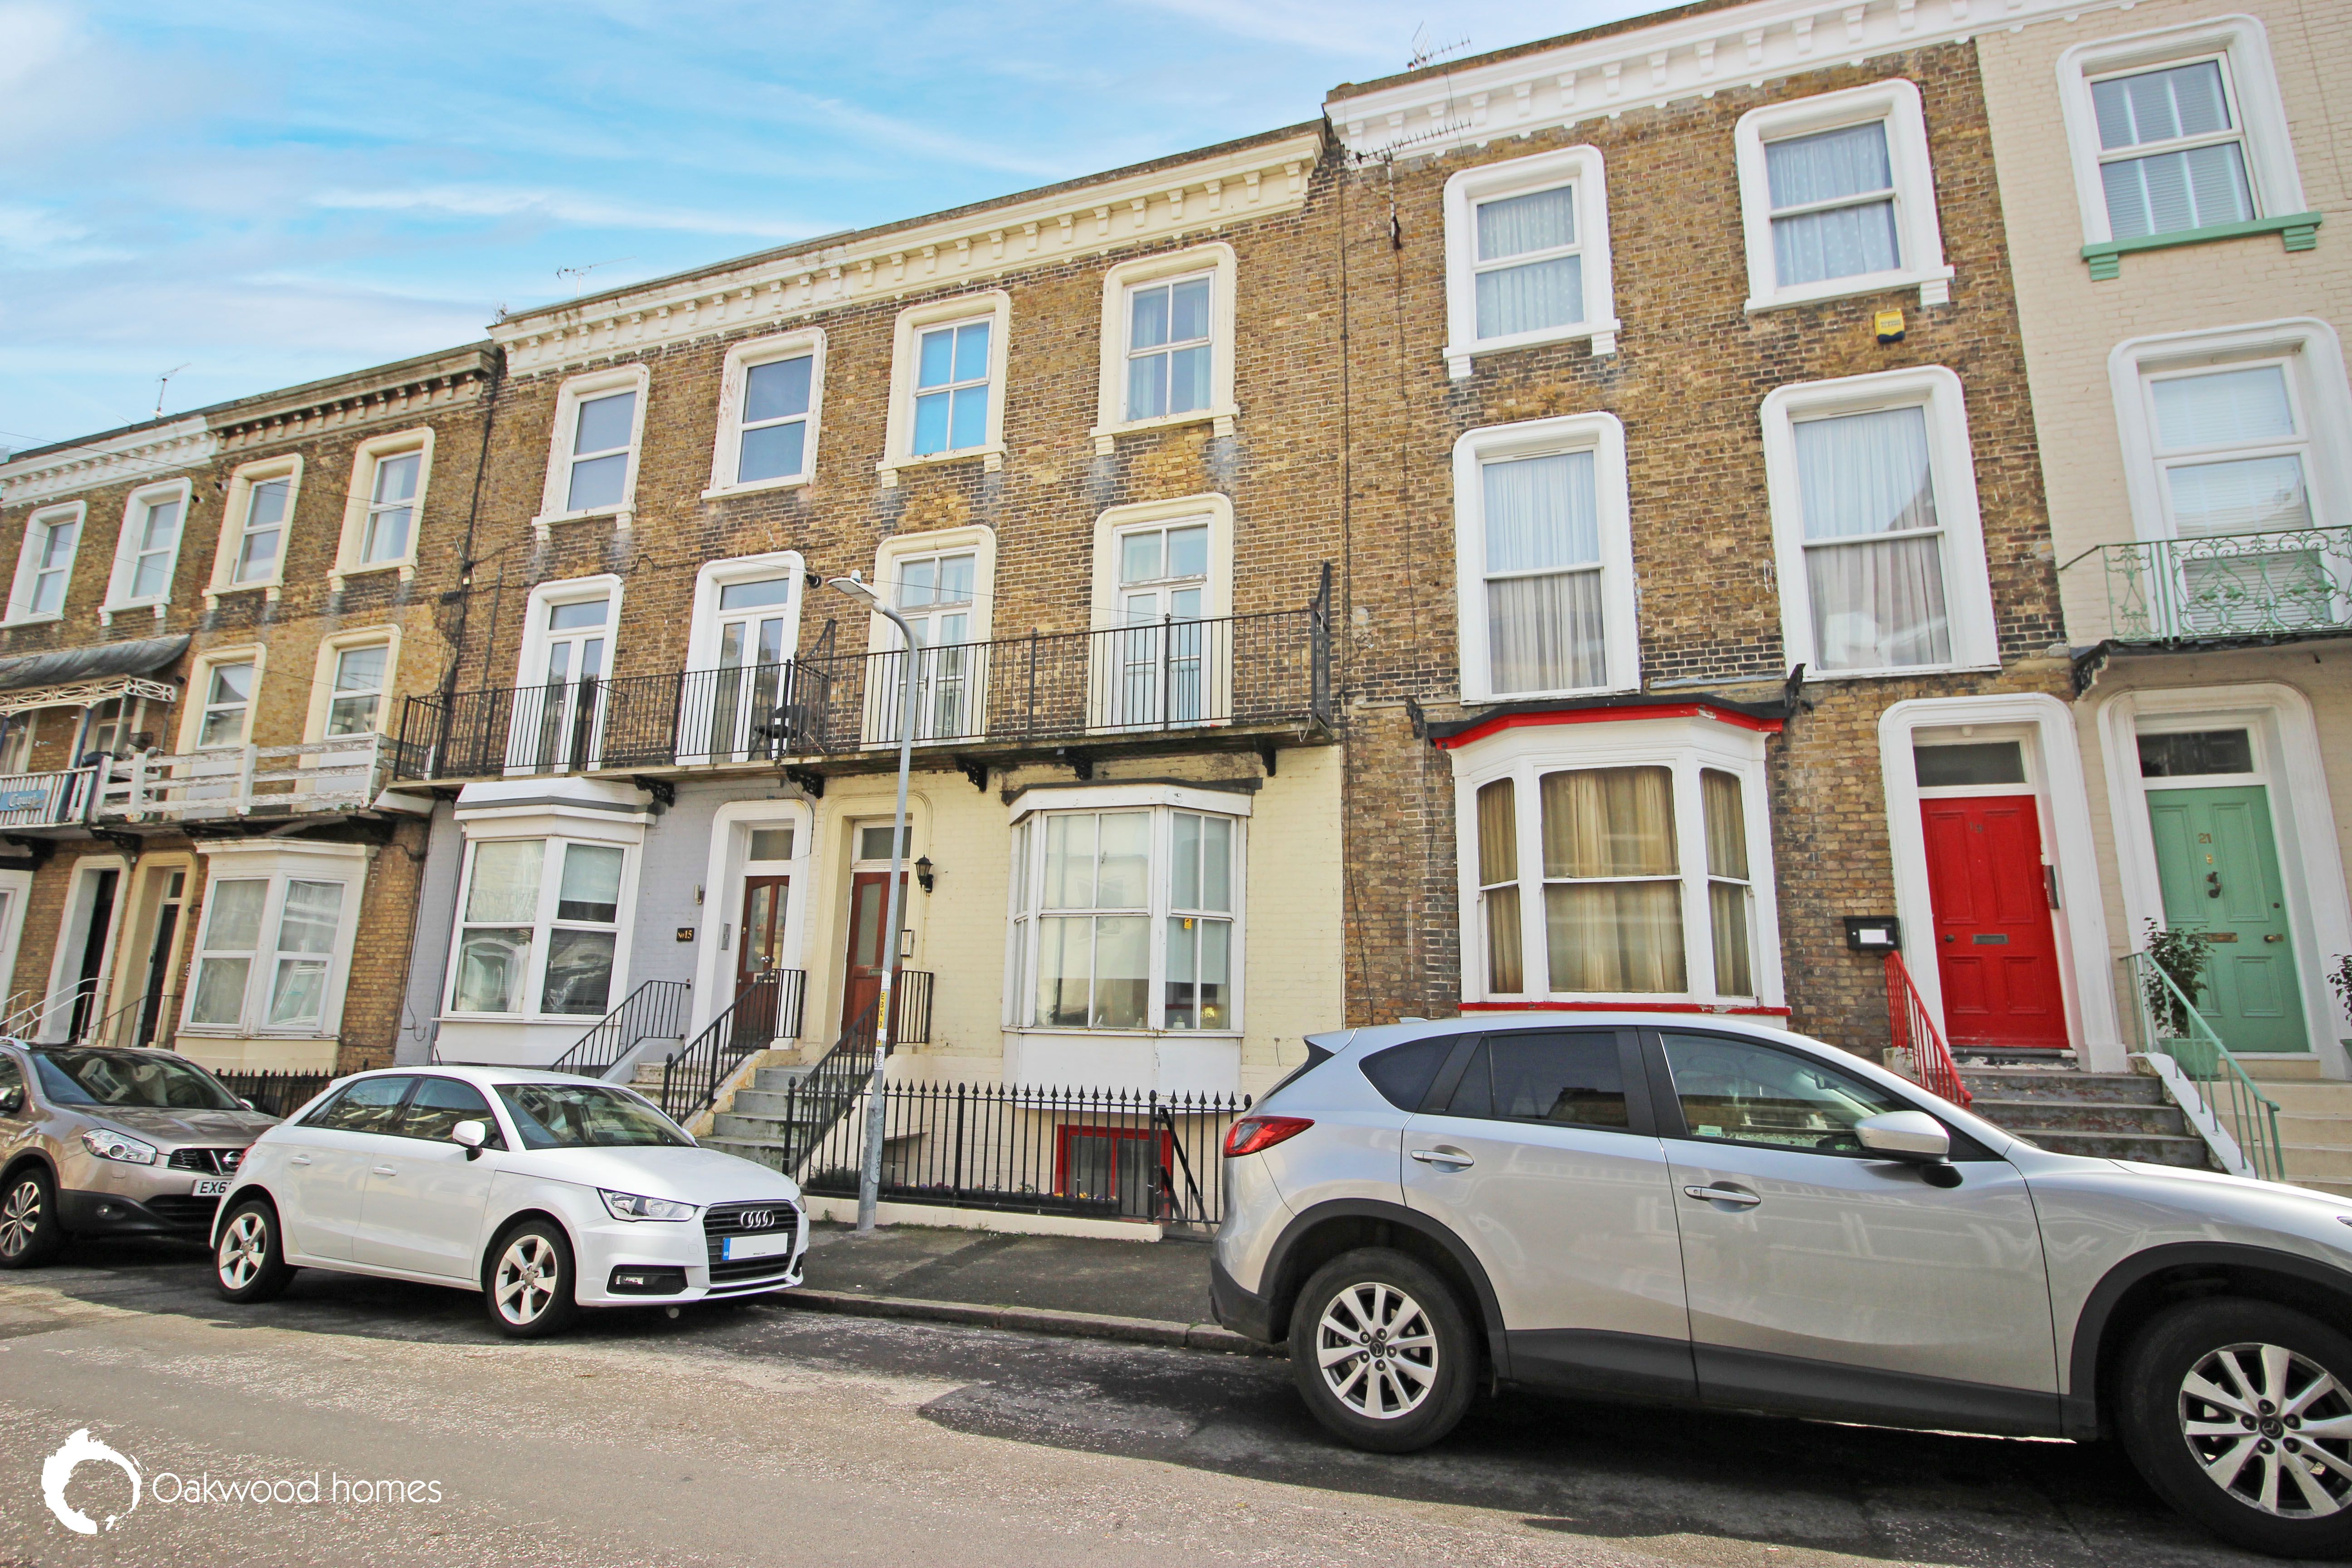 2 bed flat for sale in Ethelbert Road, Margate - Property Image 1